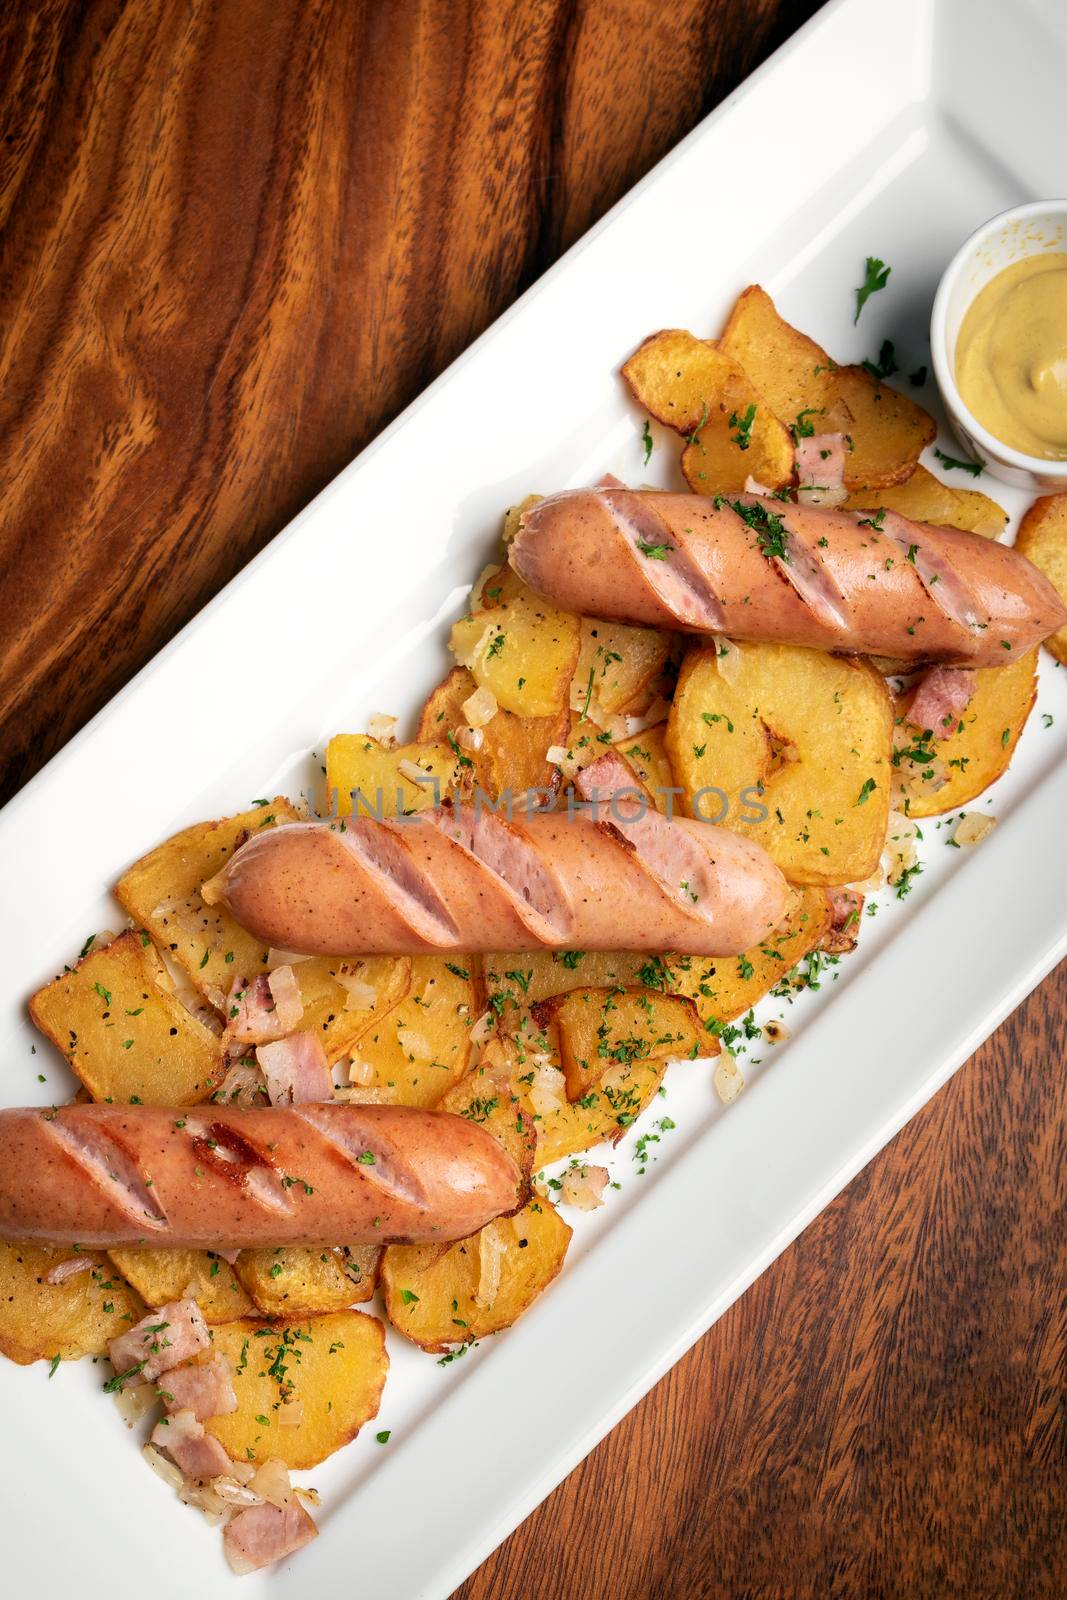 german cheese sausages with fried potato and mustard by jackmalipan